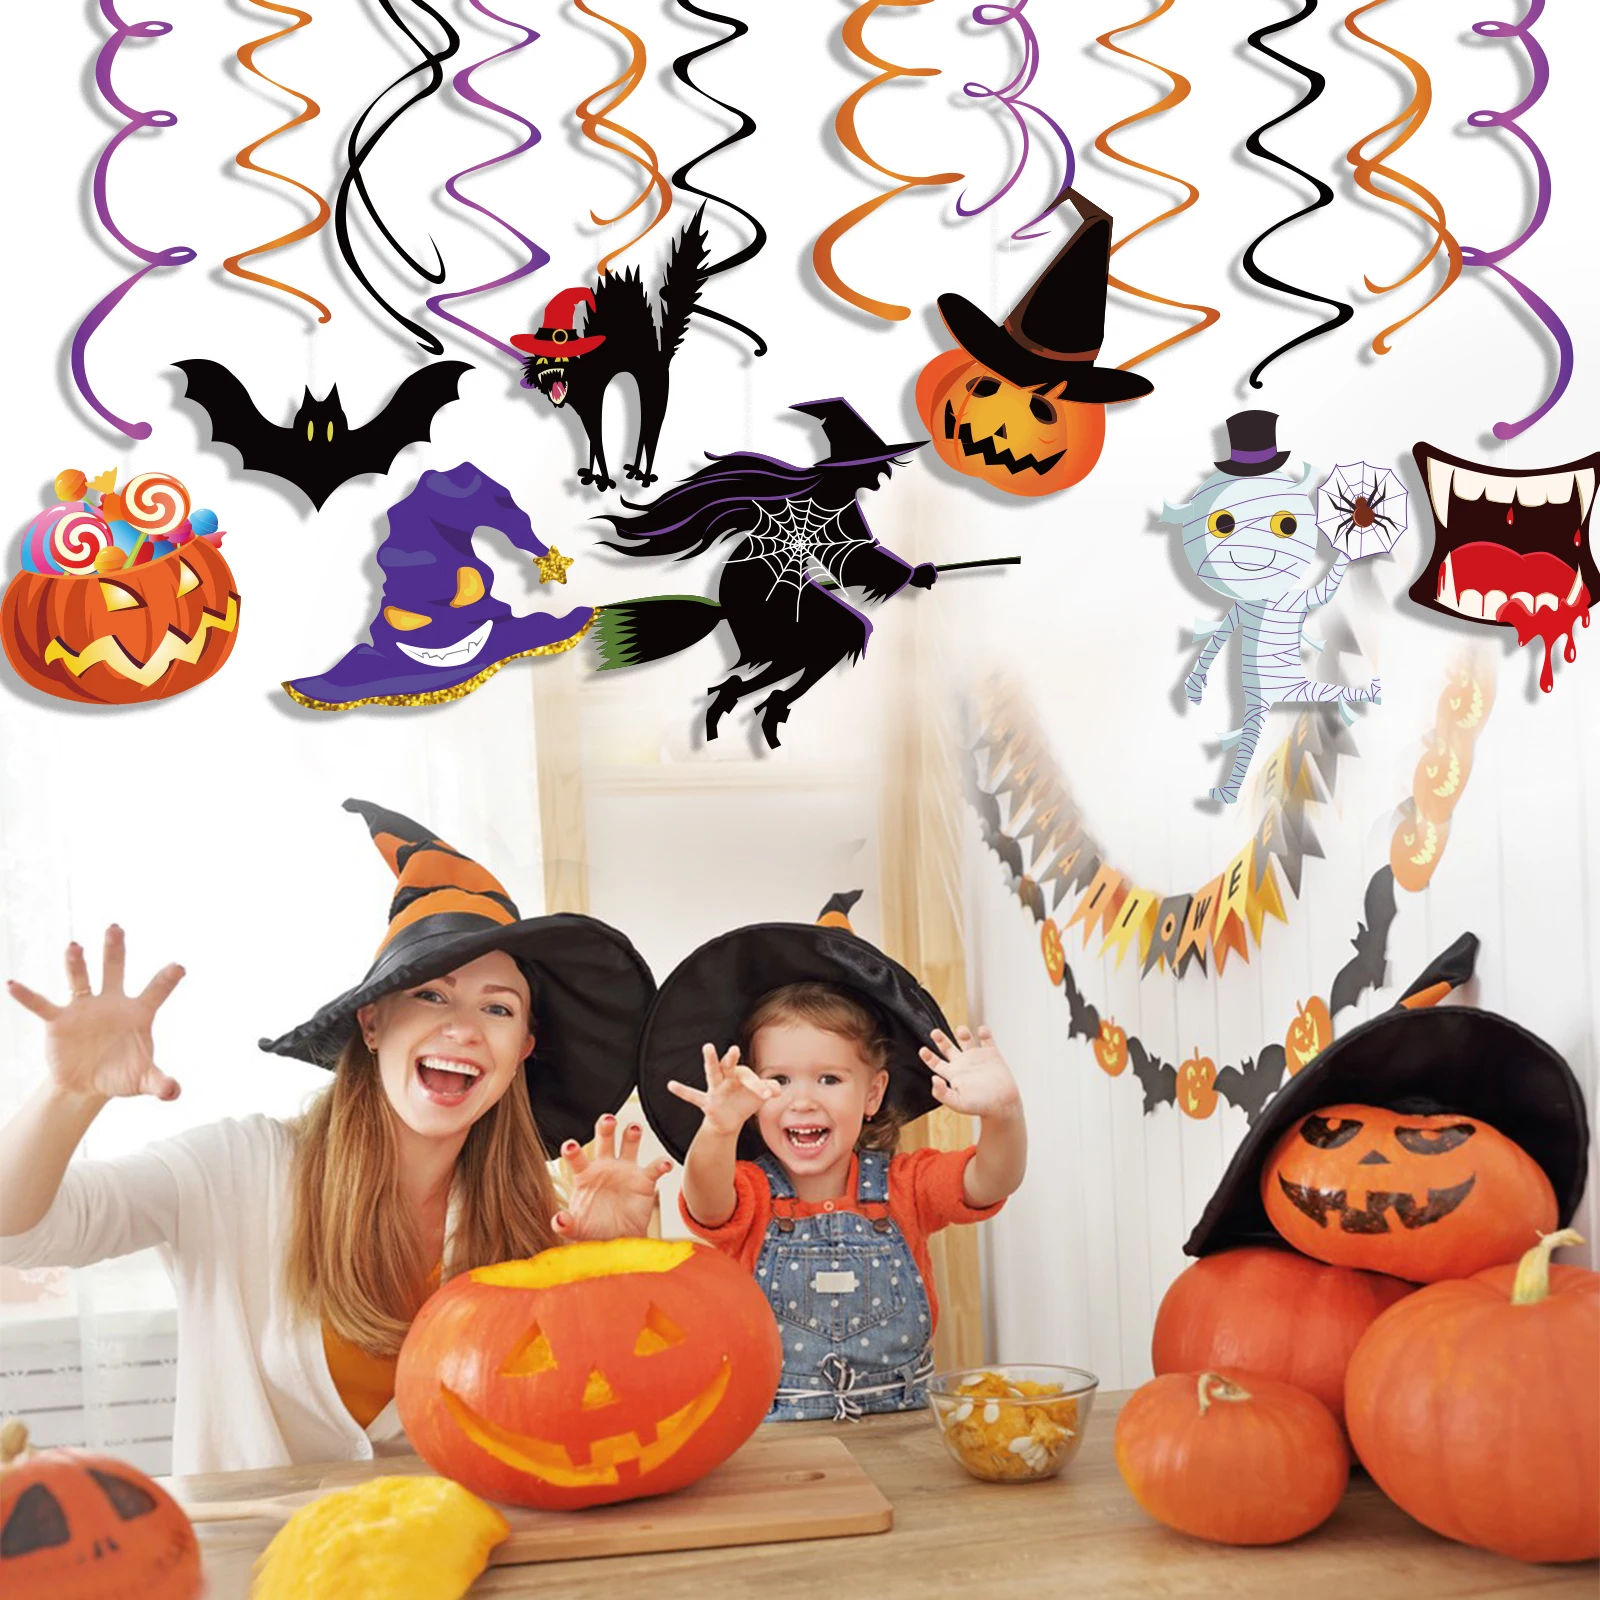 

Halloween Party Ghost Witch Theme Party Decorations PVC Hanging Swirls Spiral Cartoon Pumpkims Hats Special Hanging Spirals